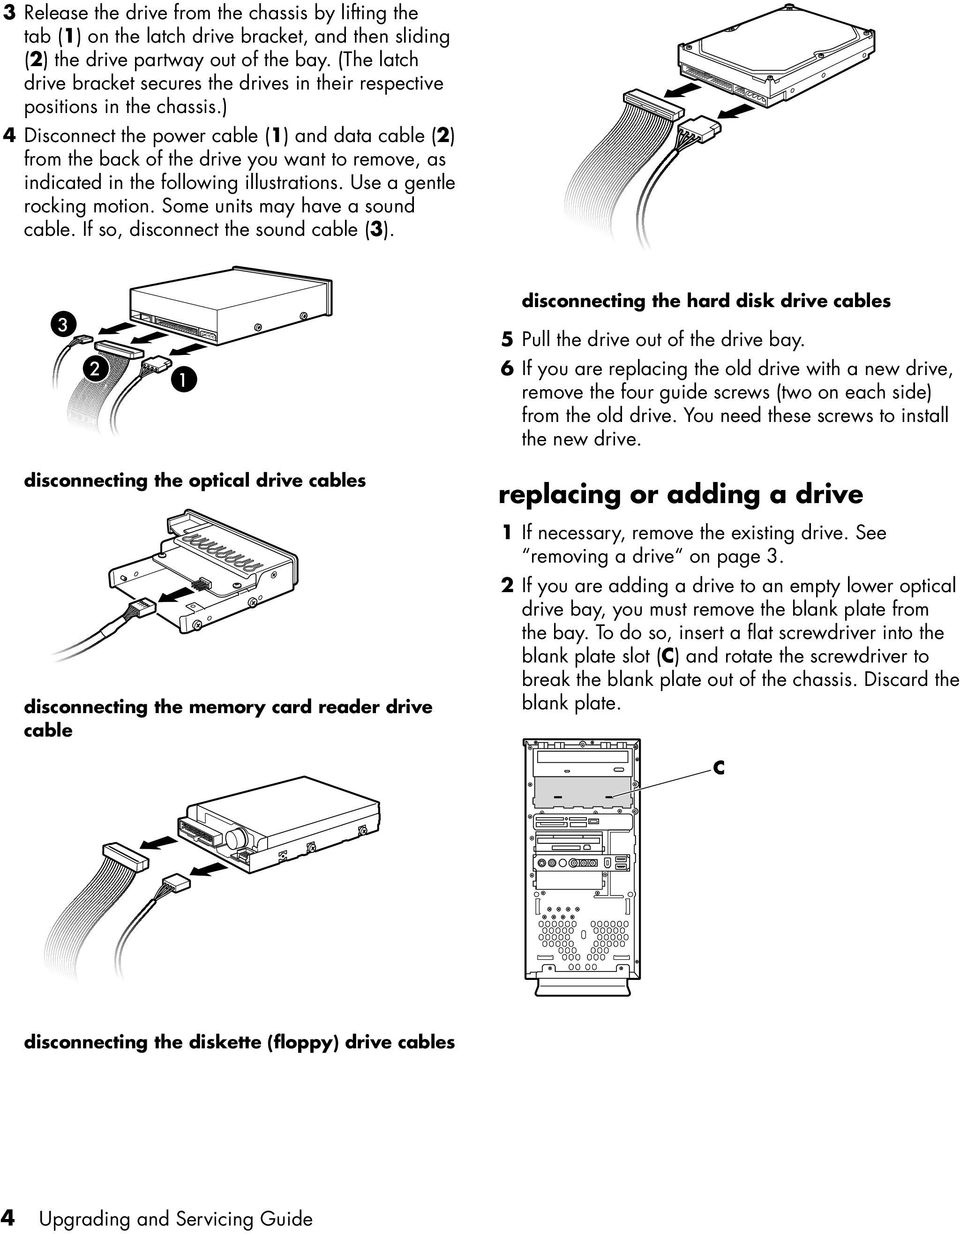 ) 4 Disconnect the power cable (1) and data cable (2) from the back of the drive you want to remove, as indicated in the following illustrations. Use a gentle rocking motion.